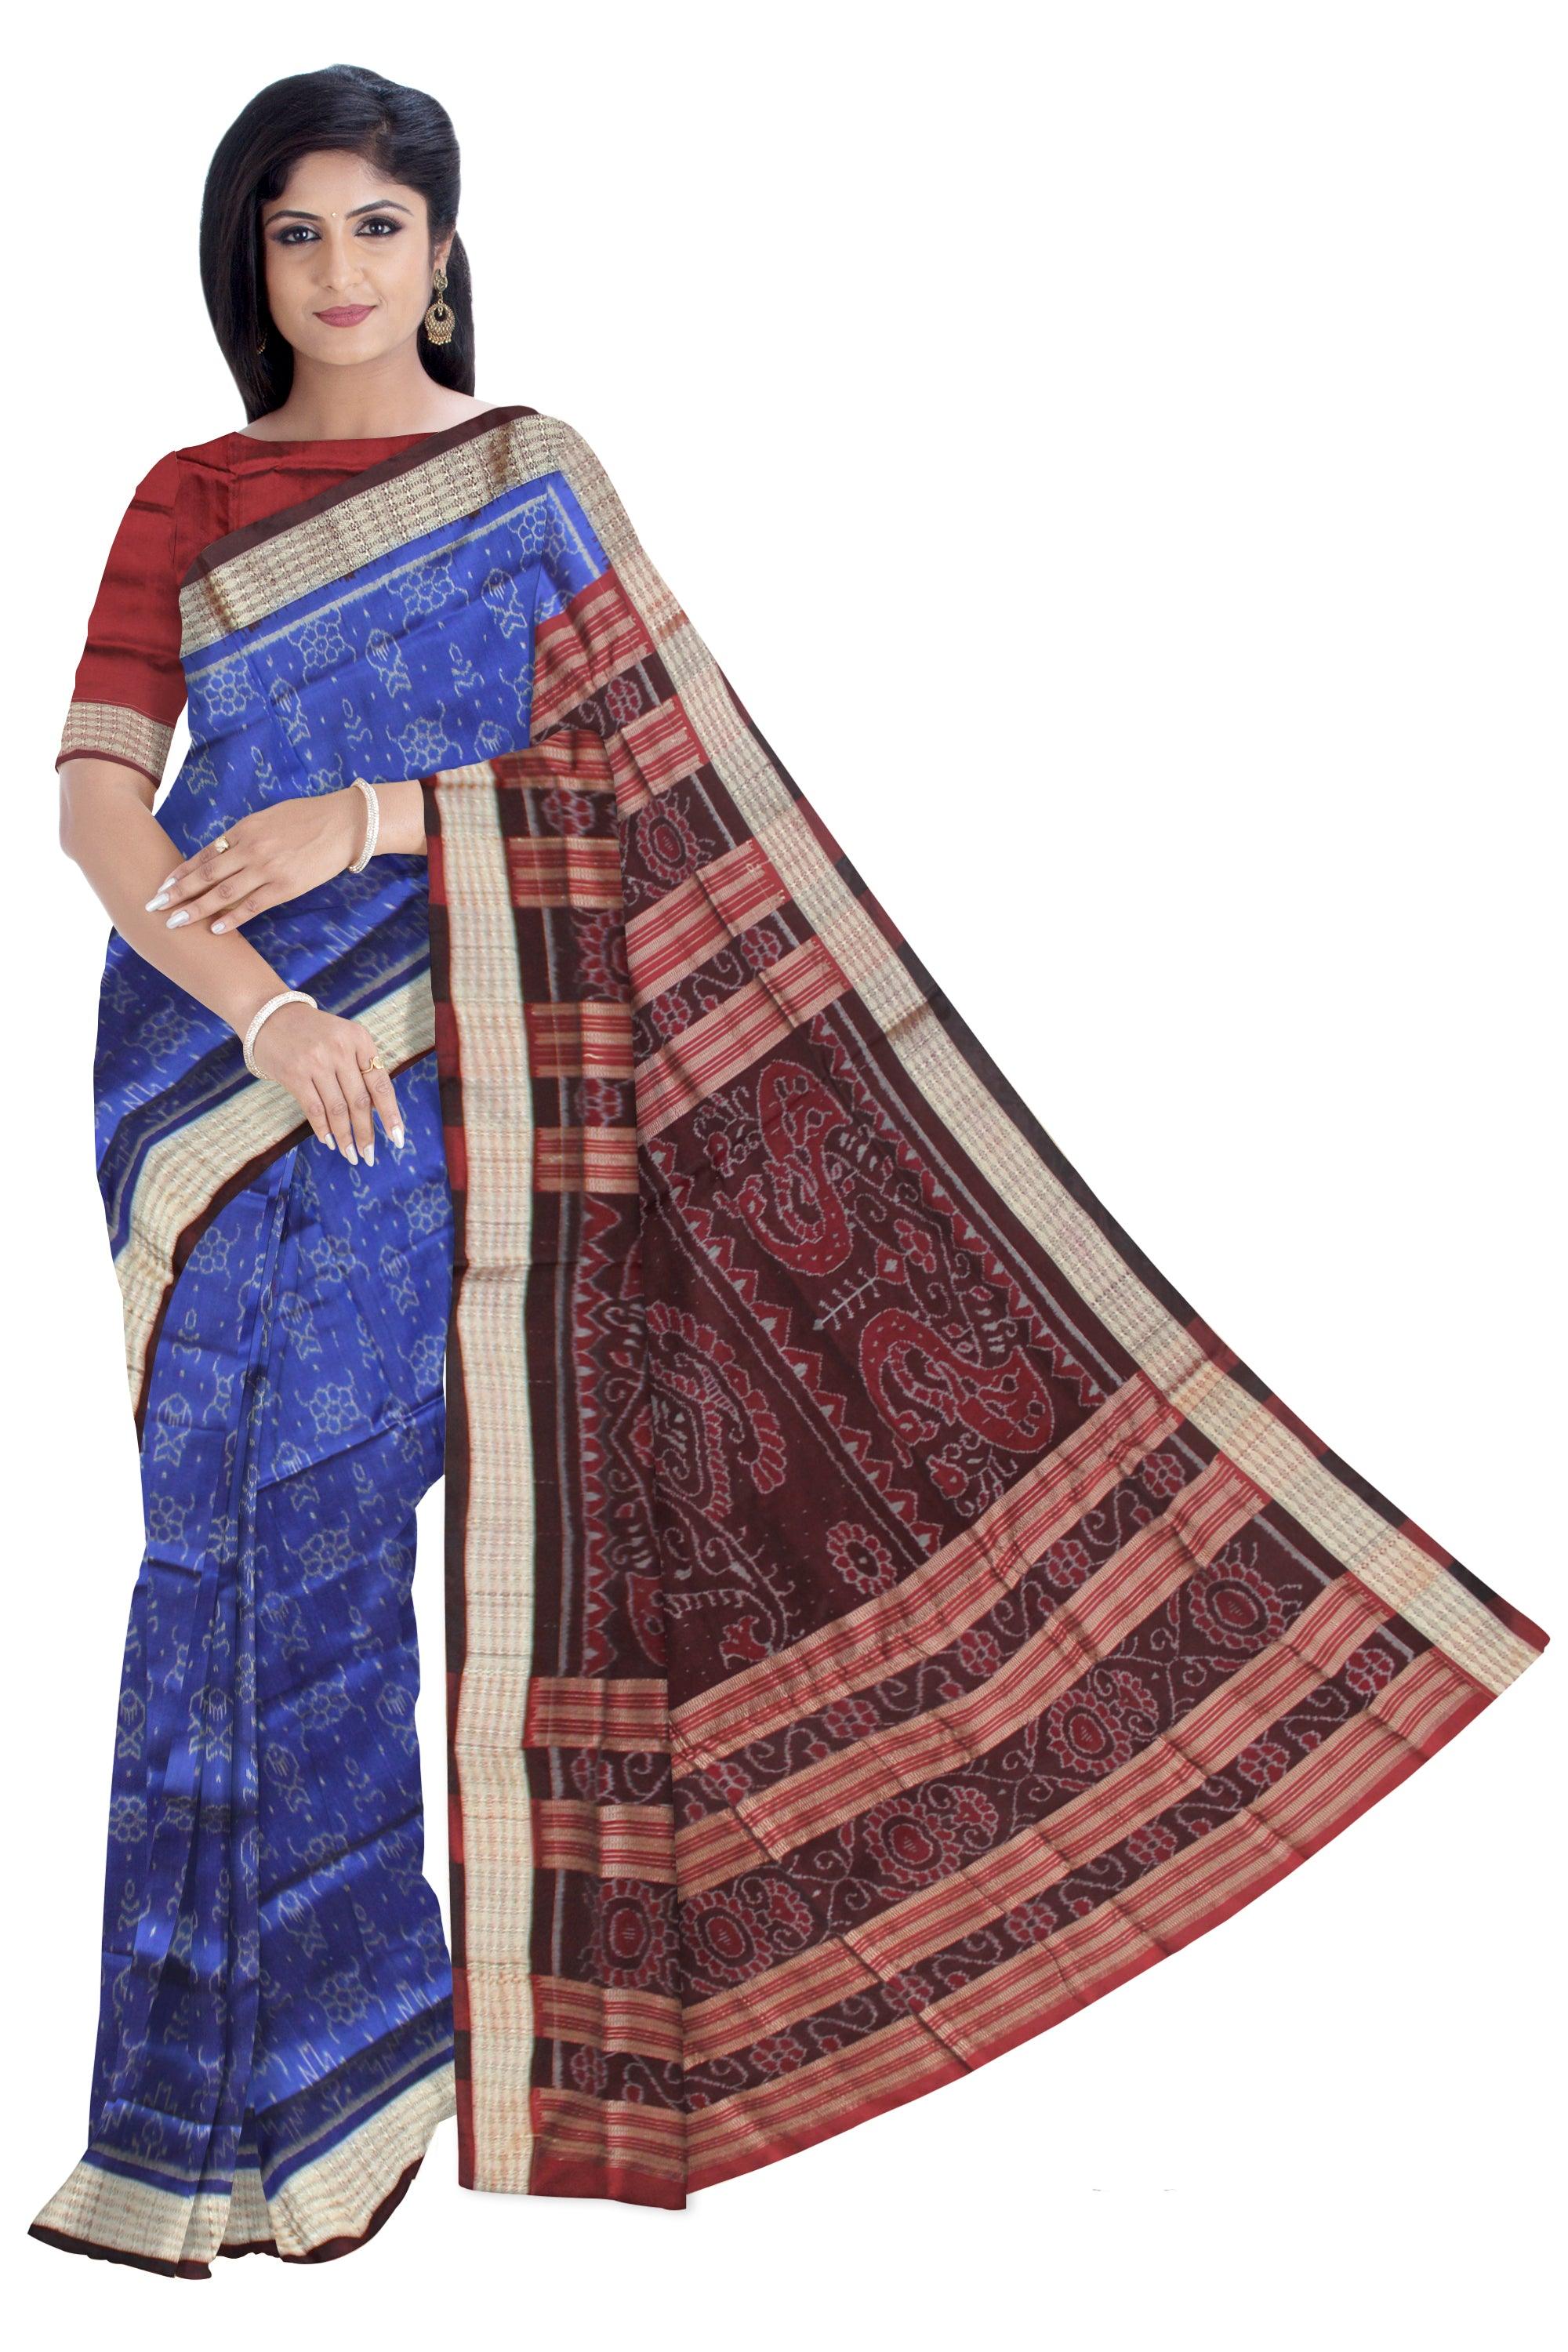 SMALL FISH AND FLOWER PATTERN PATA SAREE IS BLUE AND COFFEE COLOR BASE, COMES WITH MATCHING BLOUSE PIECE. - Koshali Arts & Crafts Enterprise